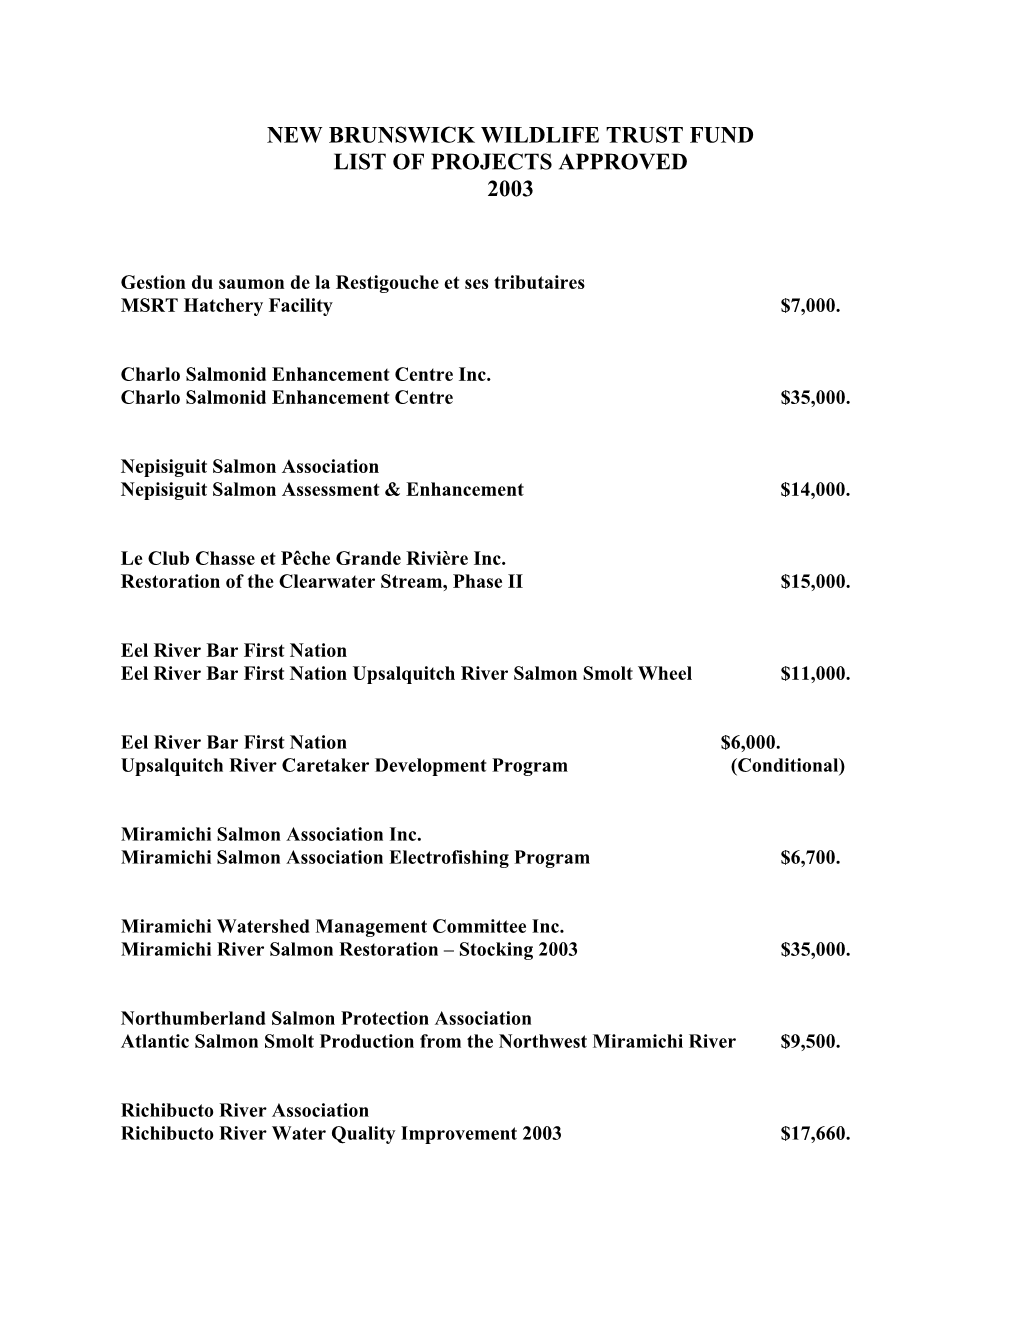 List of Projects Approved 2003